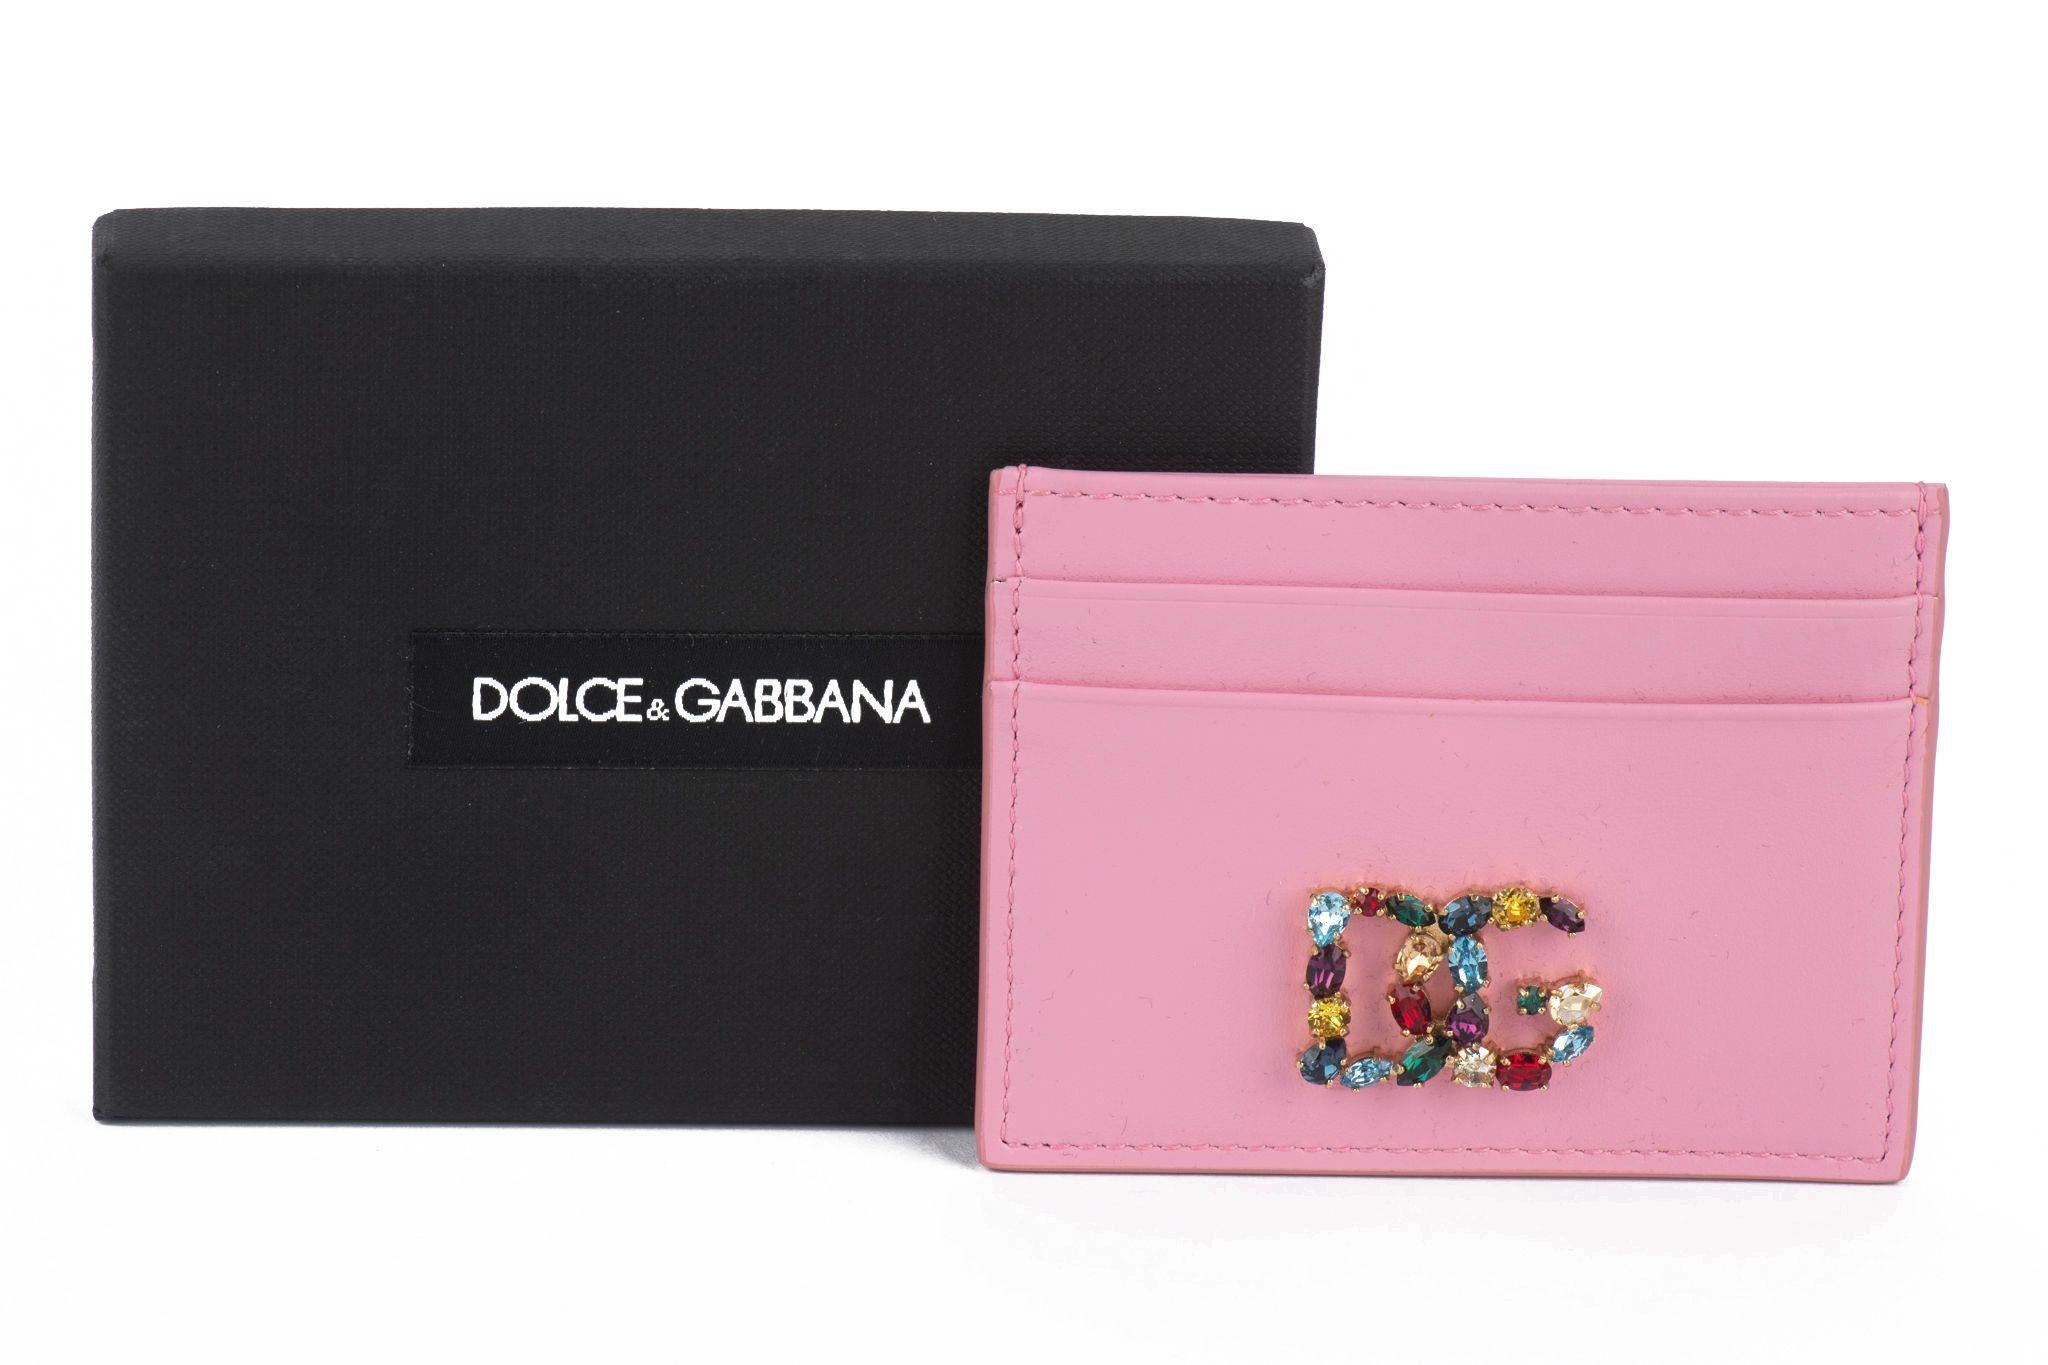 Dolce New Pink Jeweled CC Wallet In New Condition For Sale In West Hollywood, CA